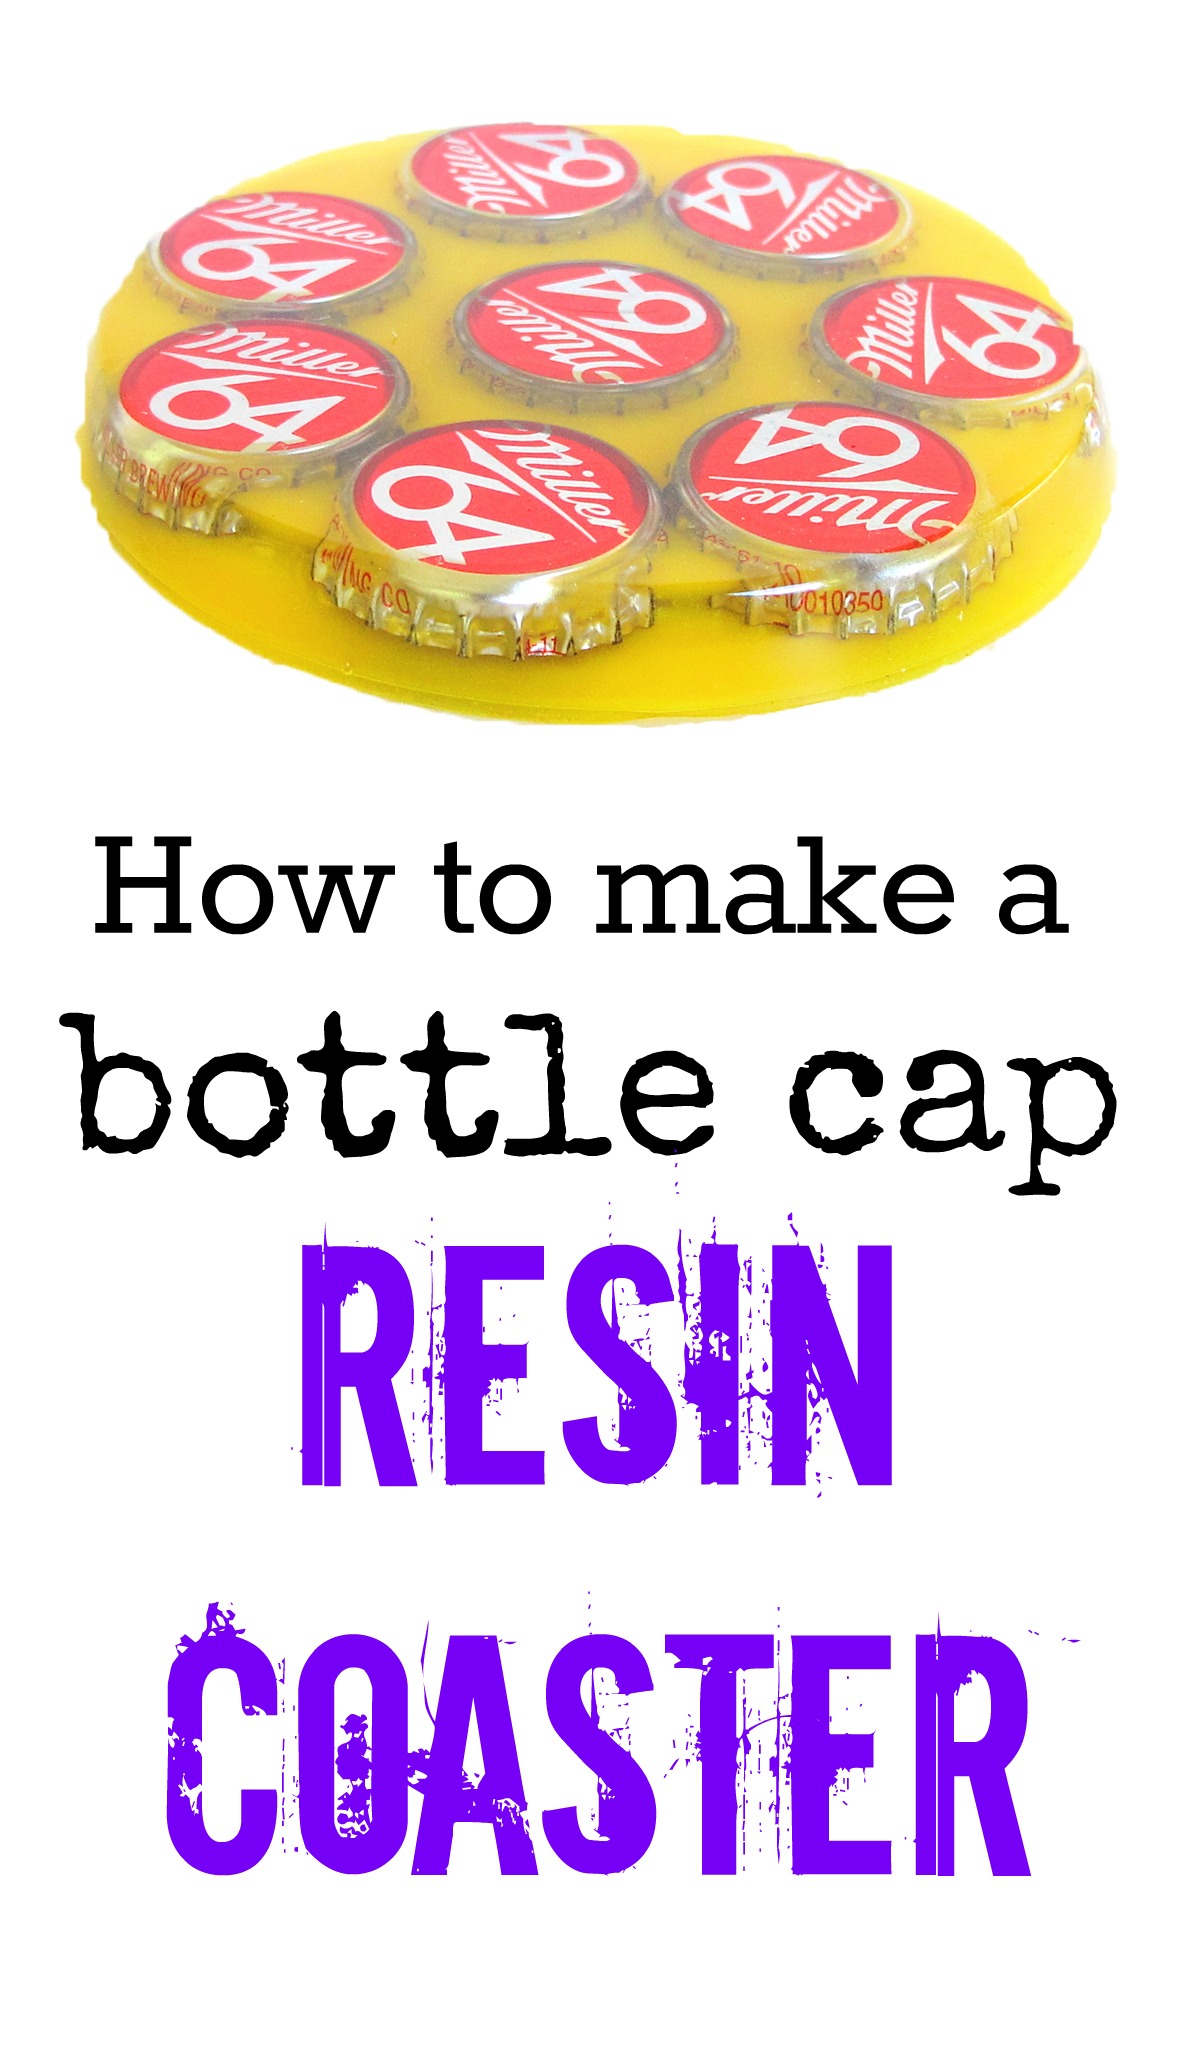 How to make a bottle cap resin coaster - Resin Obsession